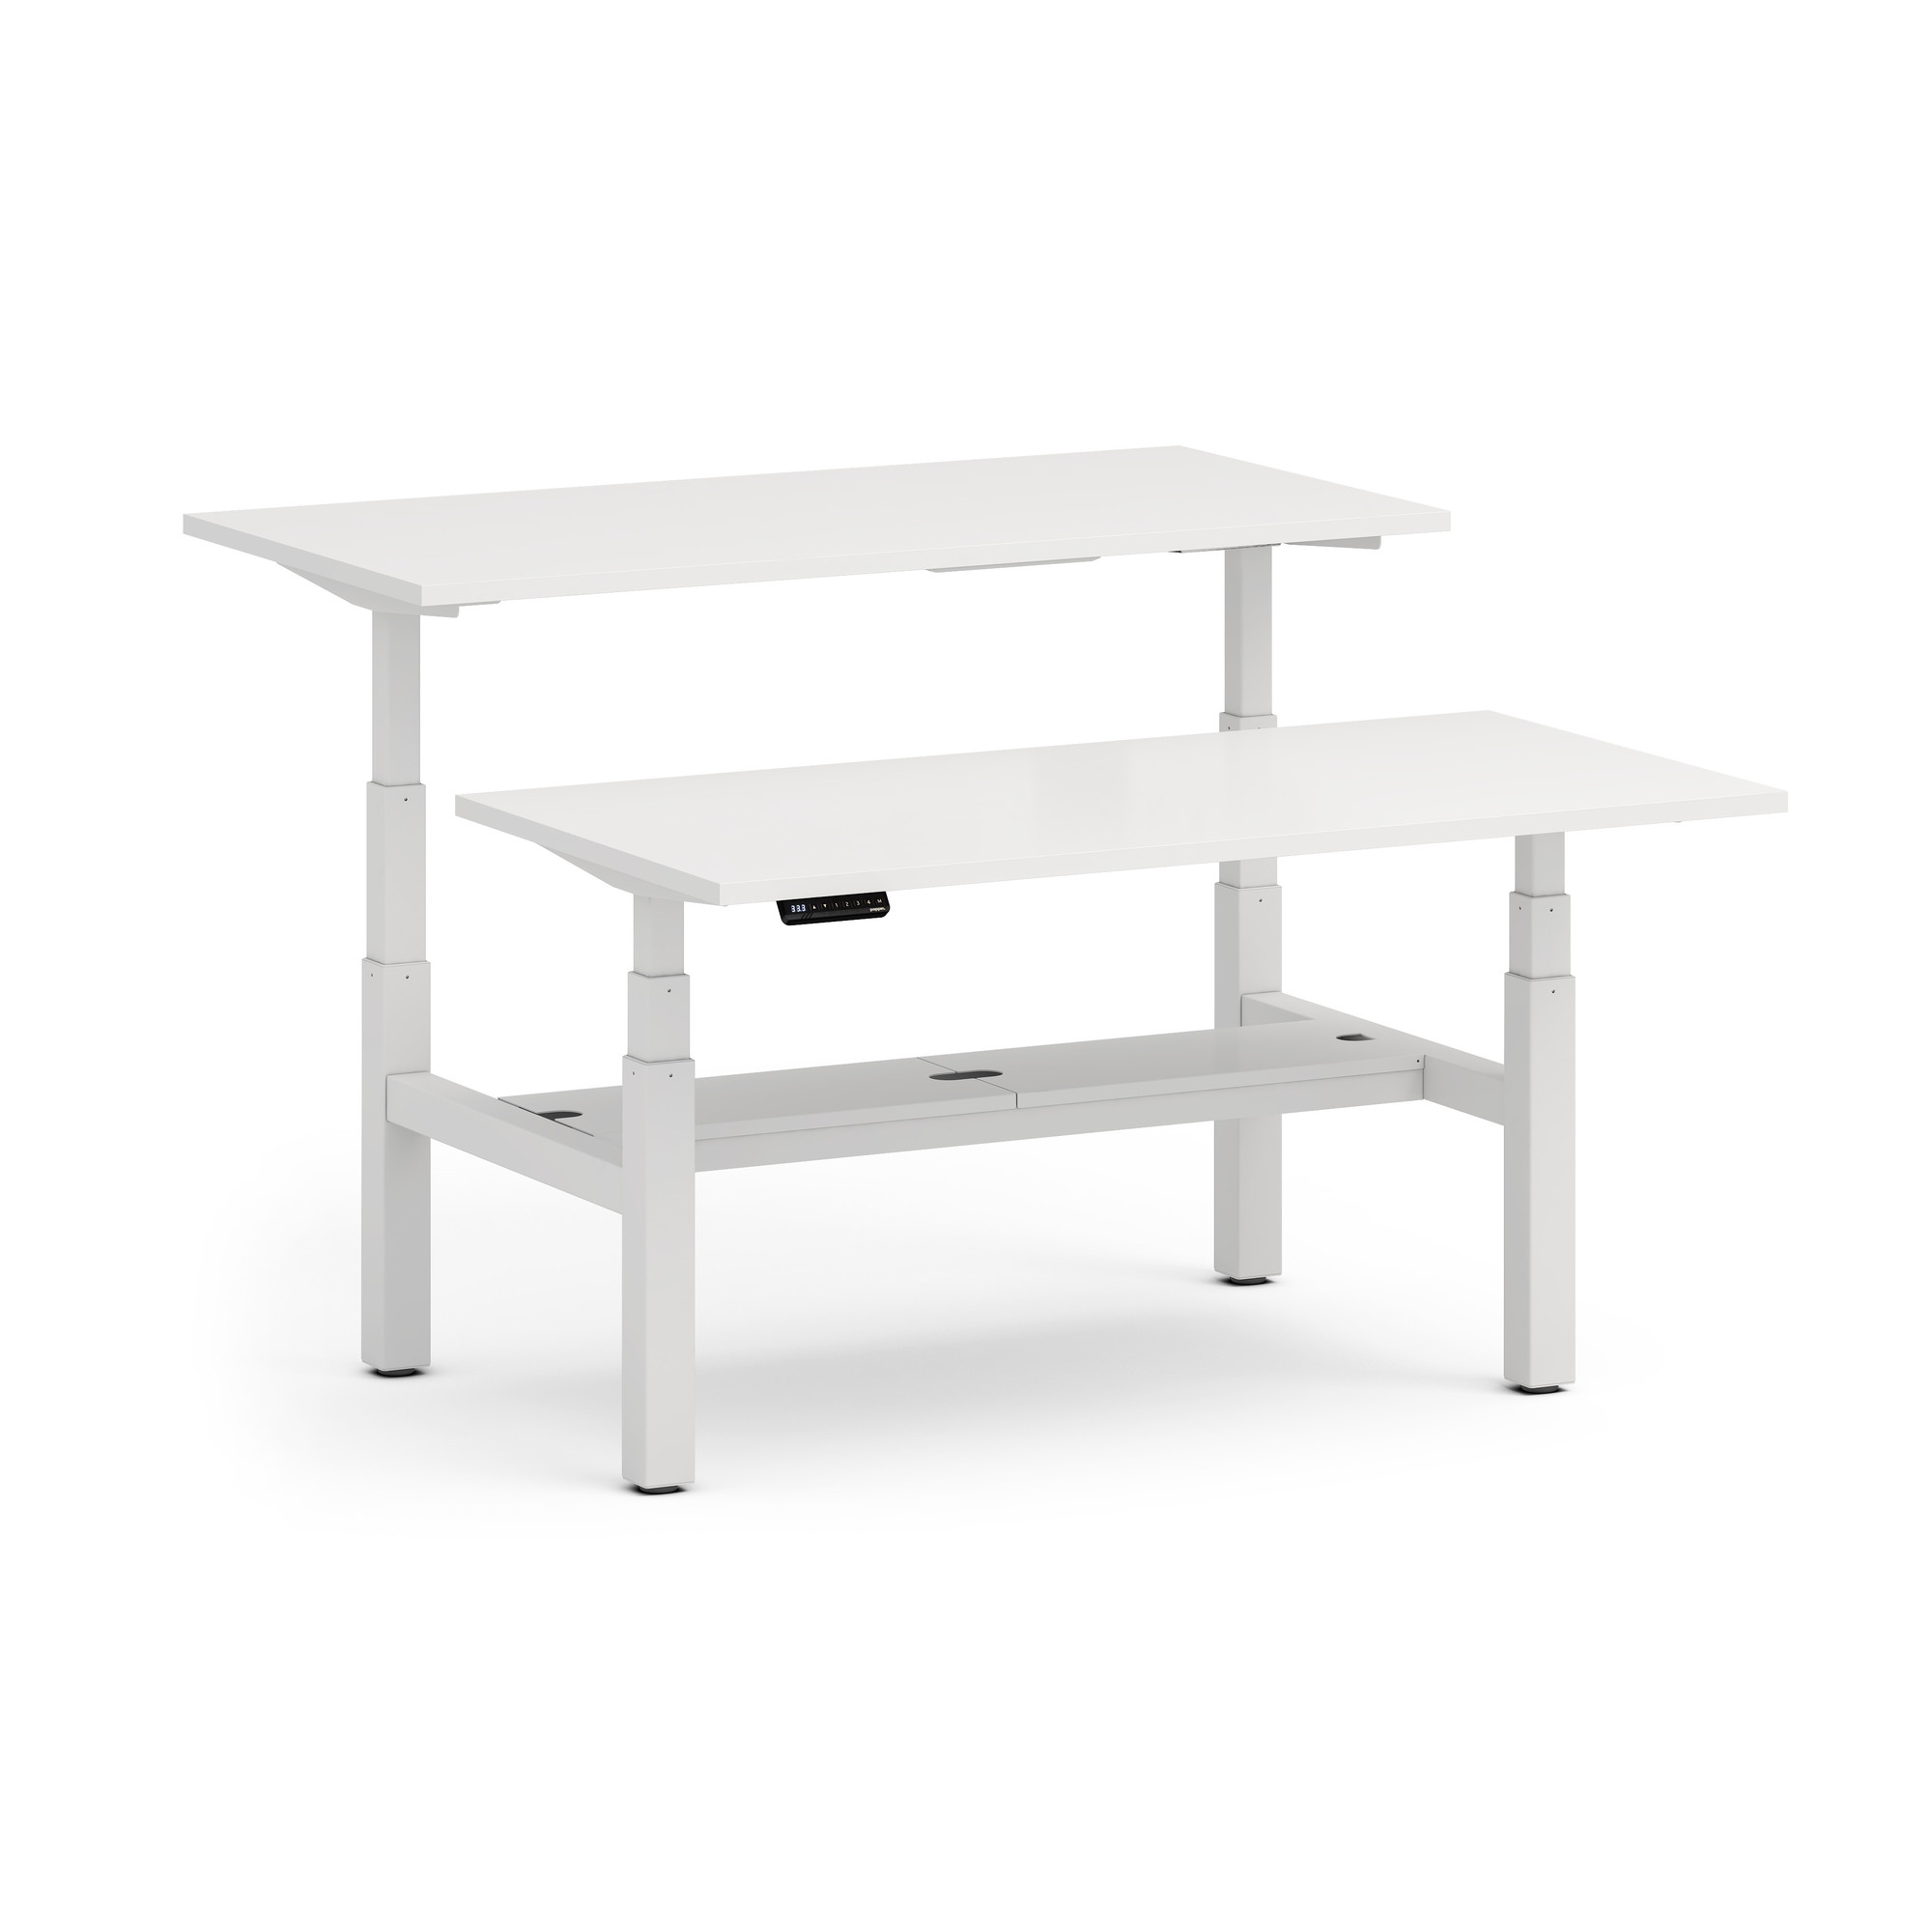 Series L Adjustable Height Double Desk for 2, White Legs